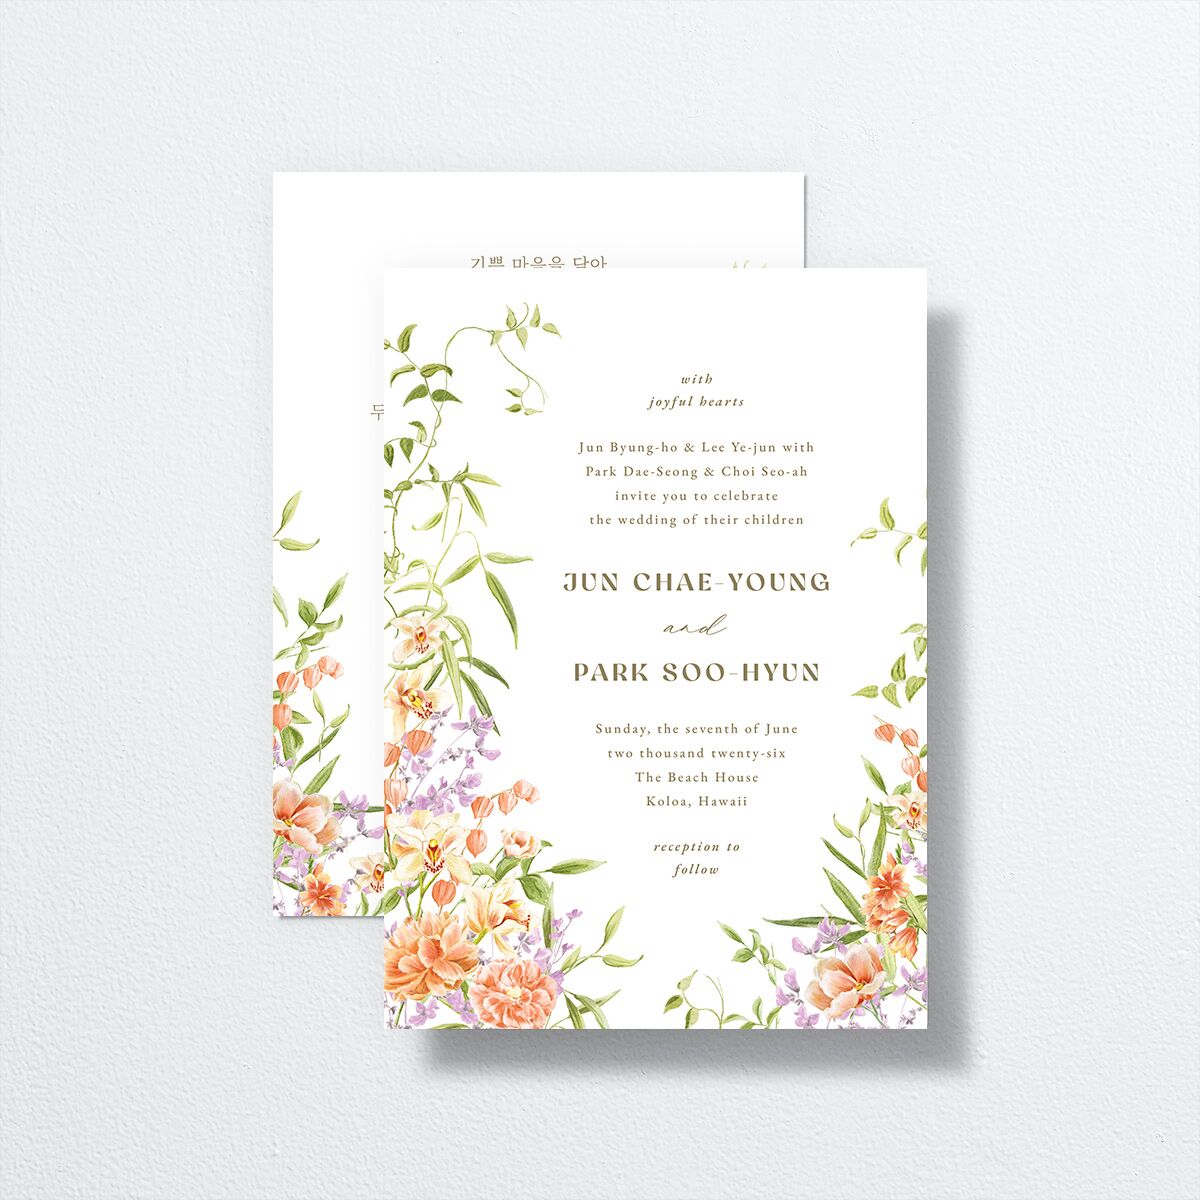 Bom Bloom Wedding Invitations front-and-back